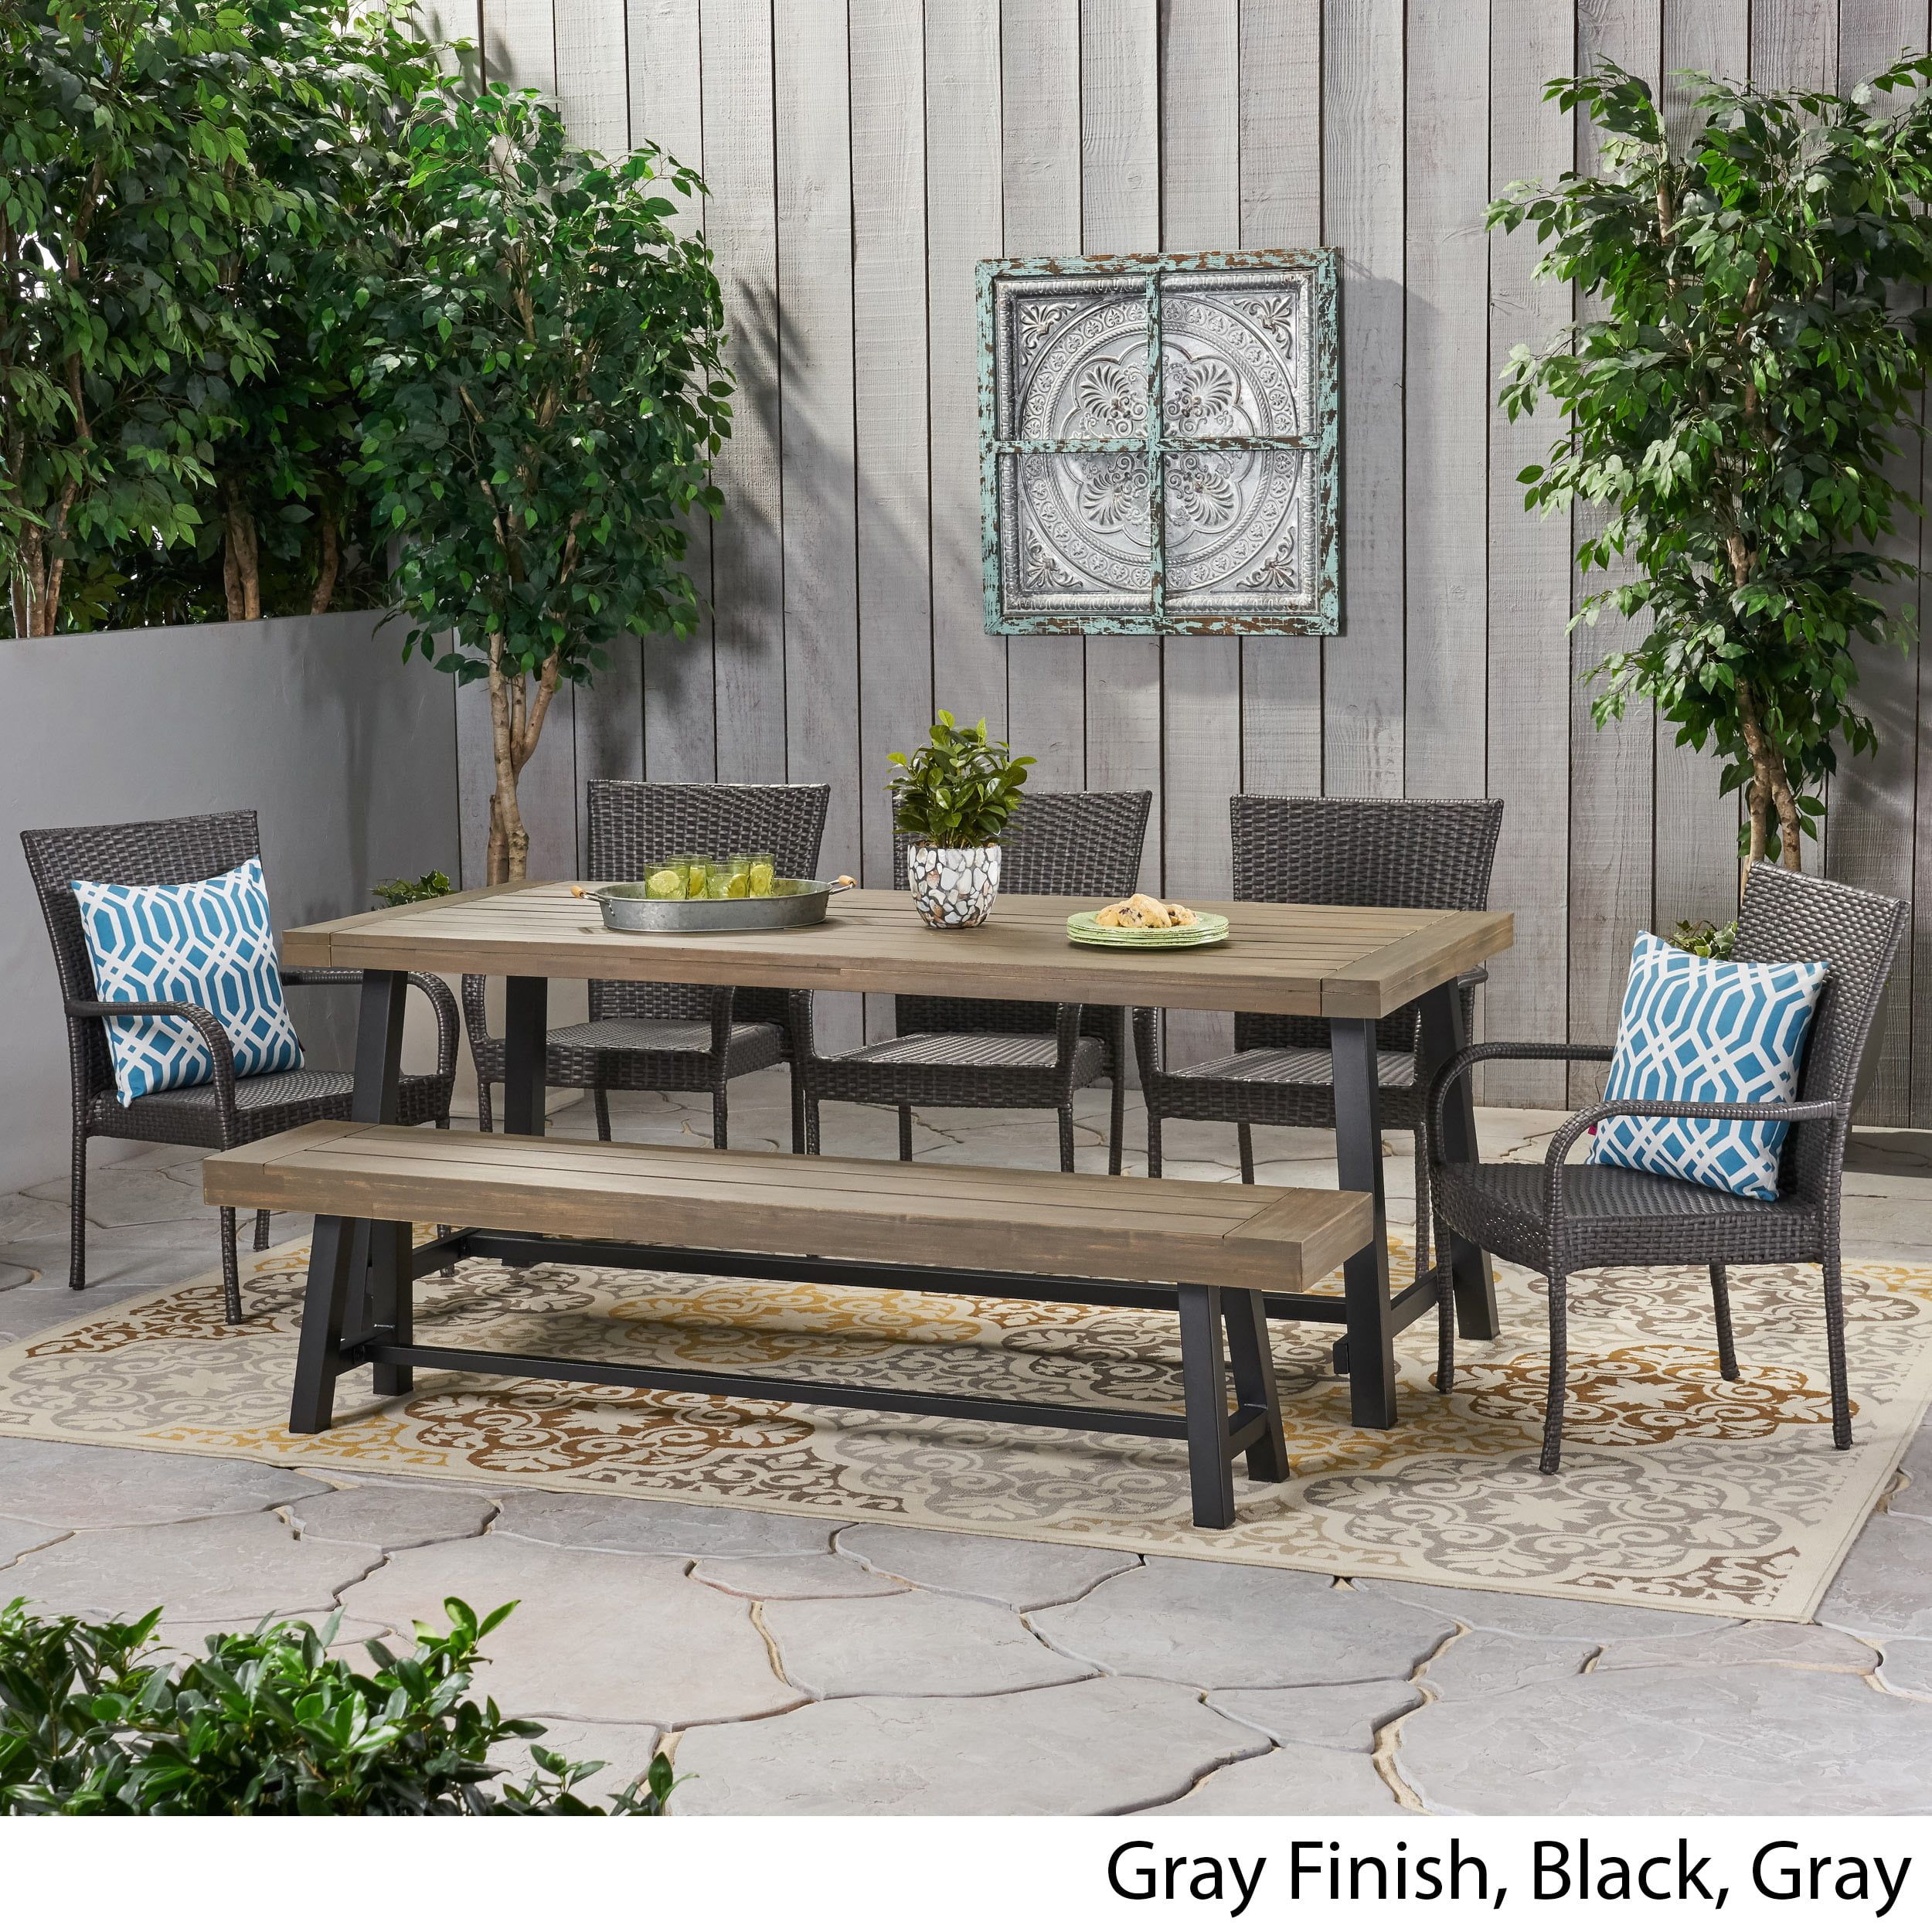 Logan Outdoor Rustic Acacia Wood 8 Seater Dining Set With Dining Bench,  Gray And Black – Walmart In Outdoor Terrace Bench Wood Furniture Set (View 4 of 15)